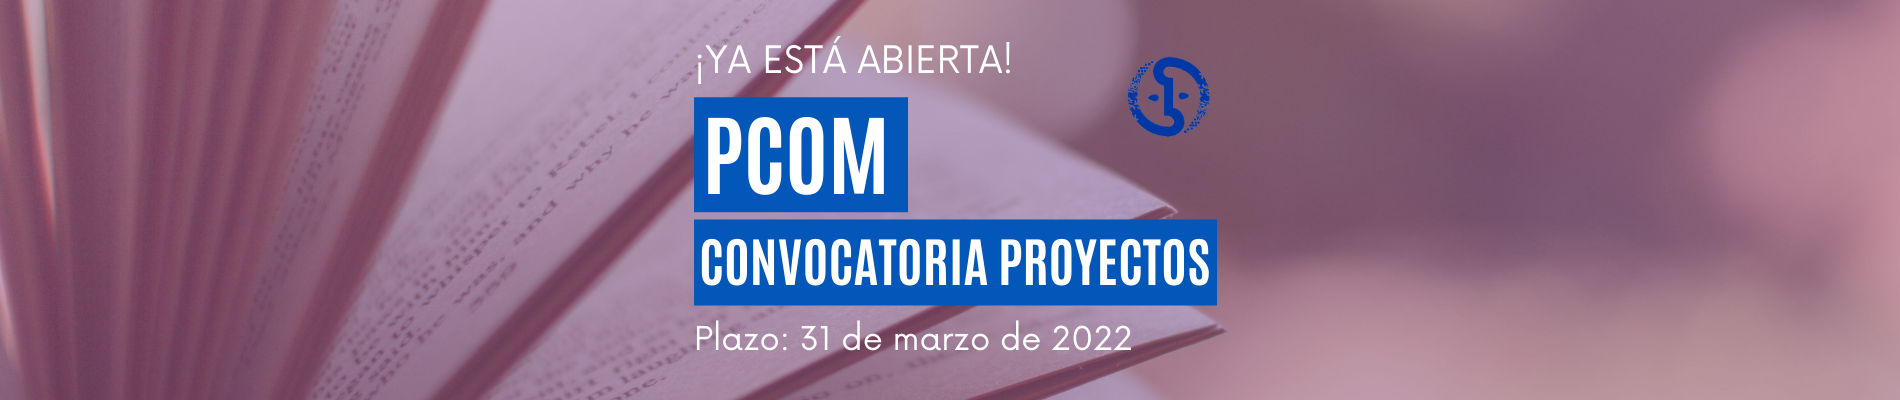 2022_pcom_call_for_projects_open_spa